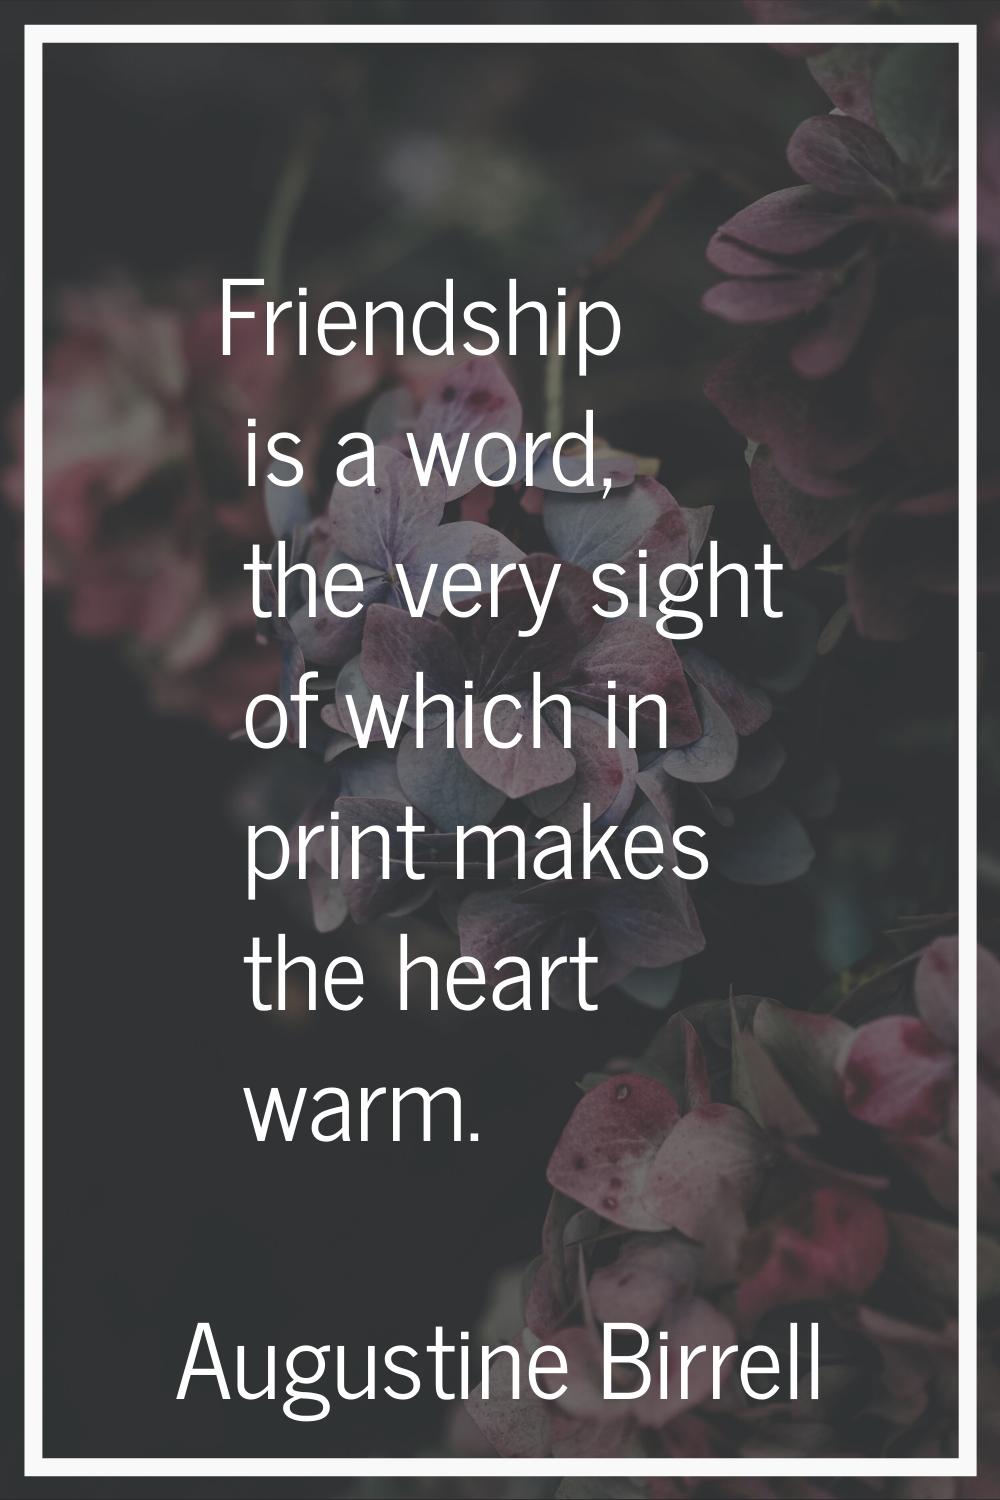 Friendship is a word, the very sight of which in print makes the heart warm.